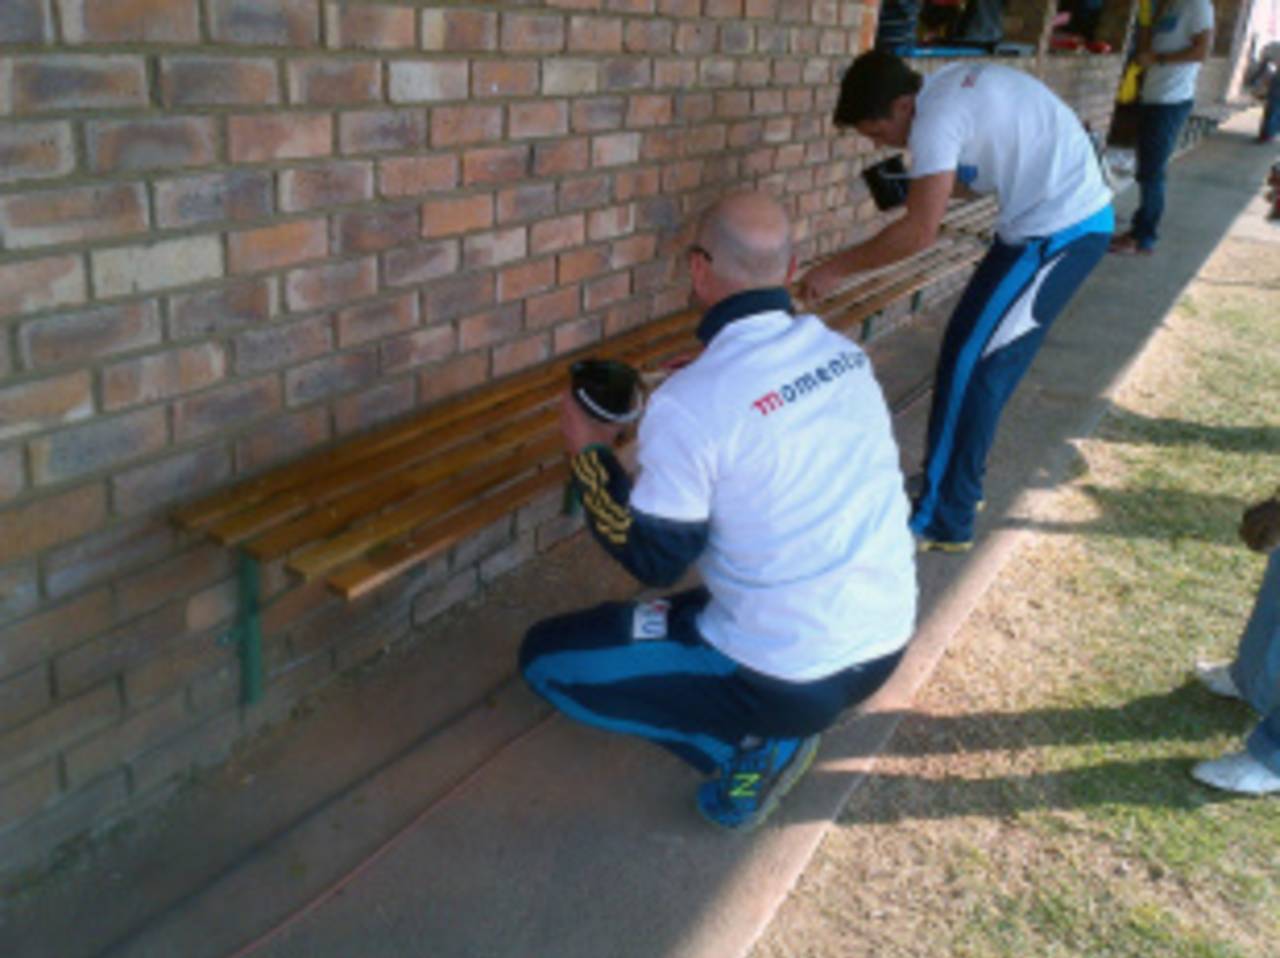 Titans players paint benches at the Mamelodi Cricket Club, Tshwane, August 2013